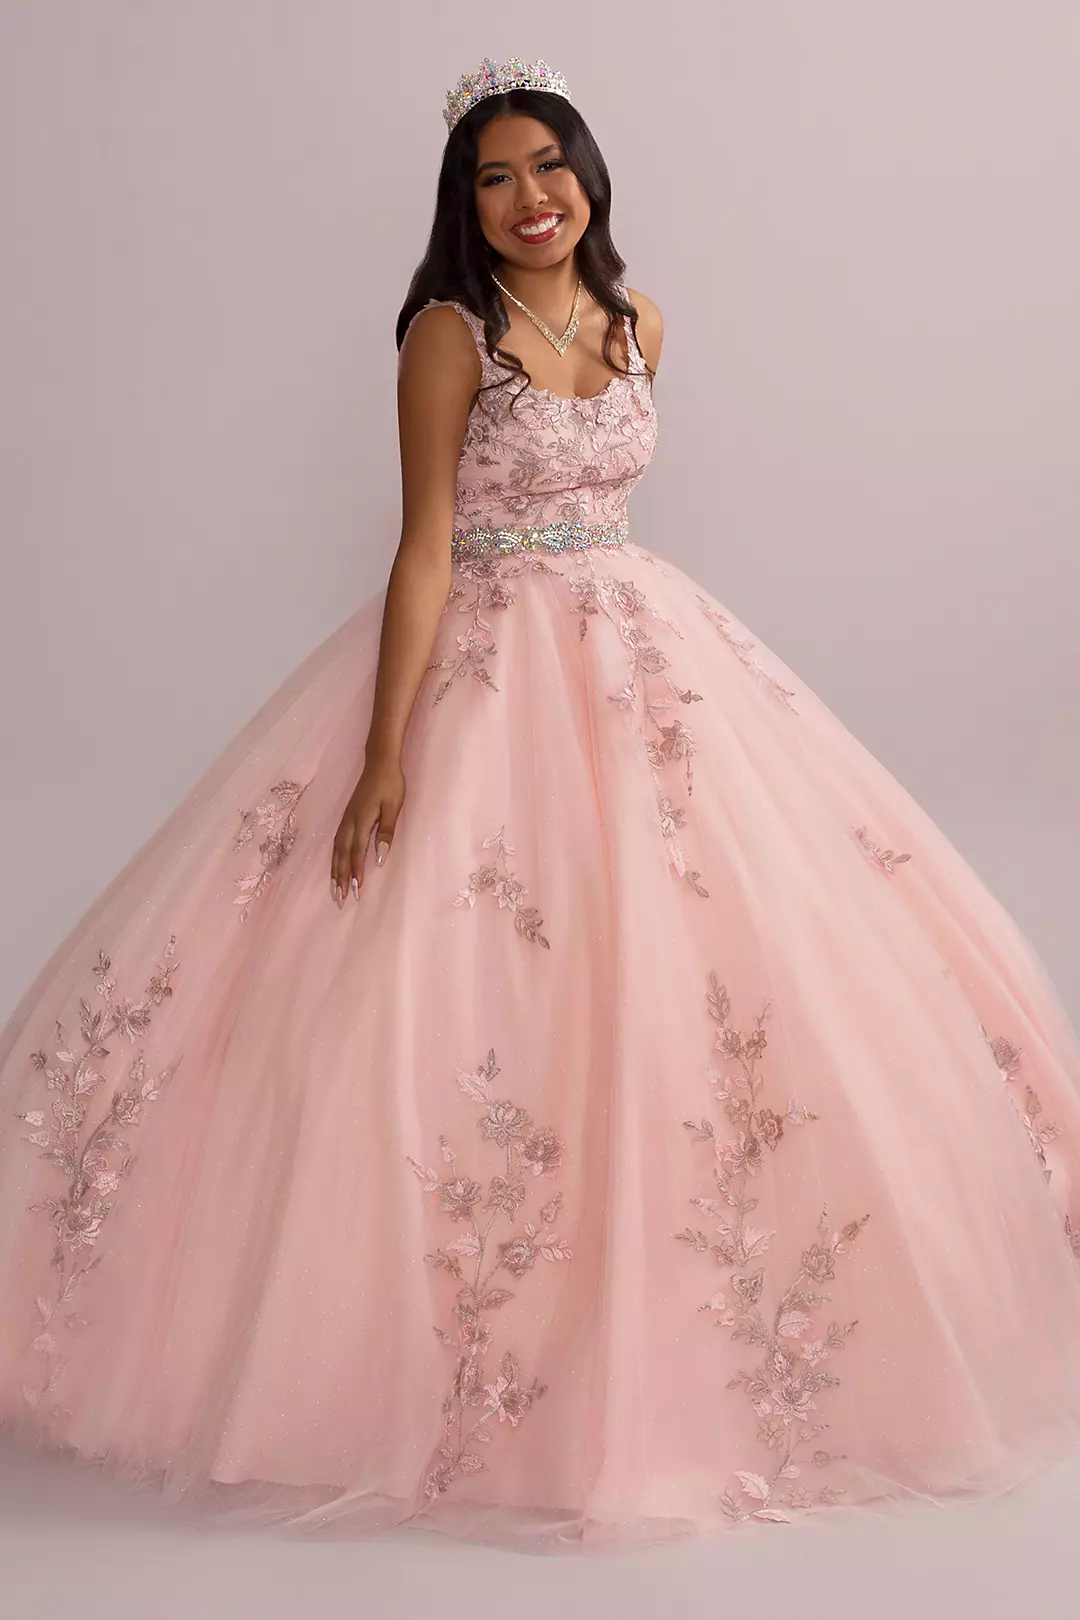 Metallic Floral Glitter Tulle Quince Ball Gown Image